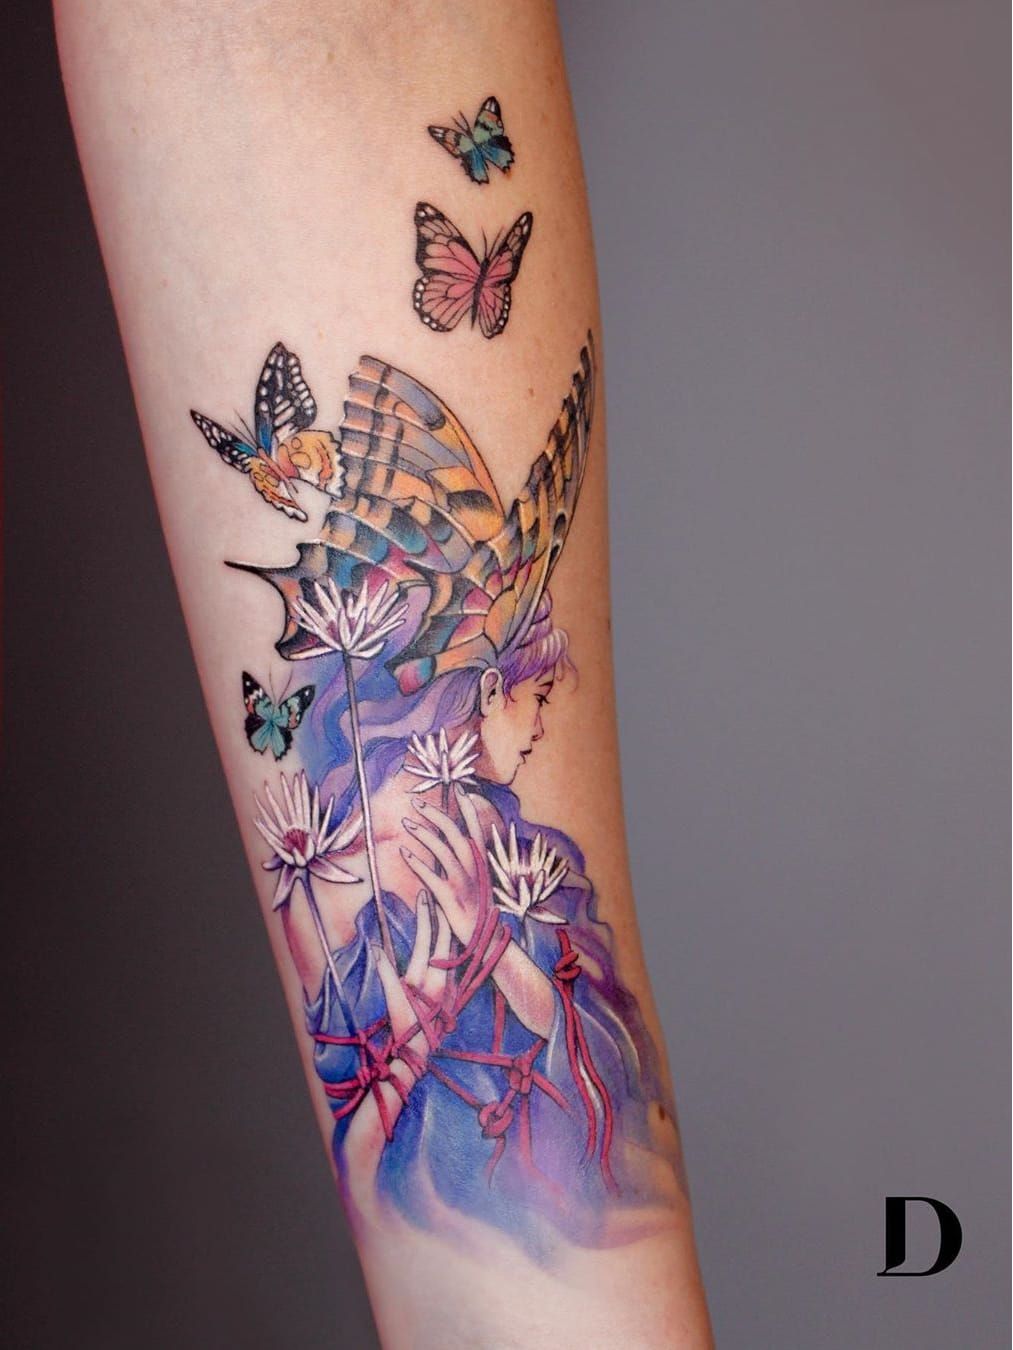 120 Amazing Butterfly Tattoo Designs  Art and Design